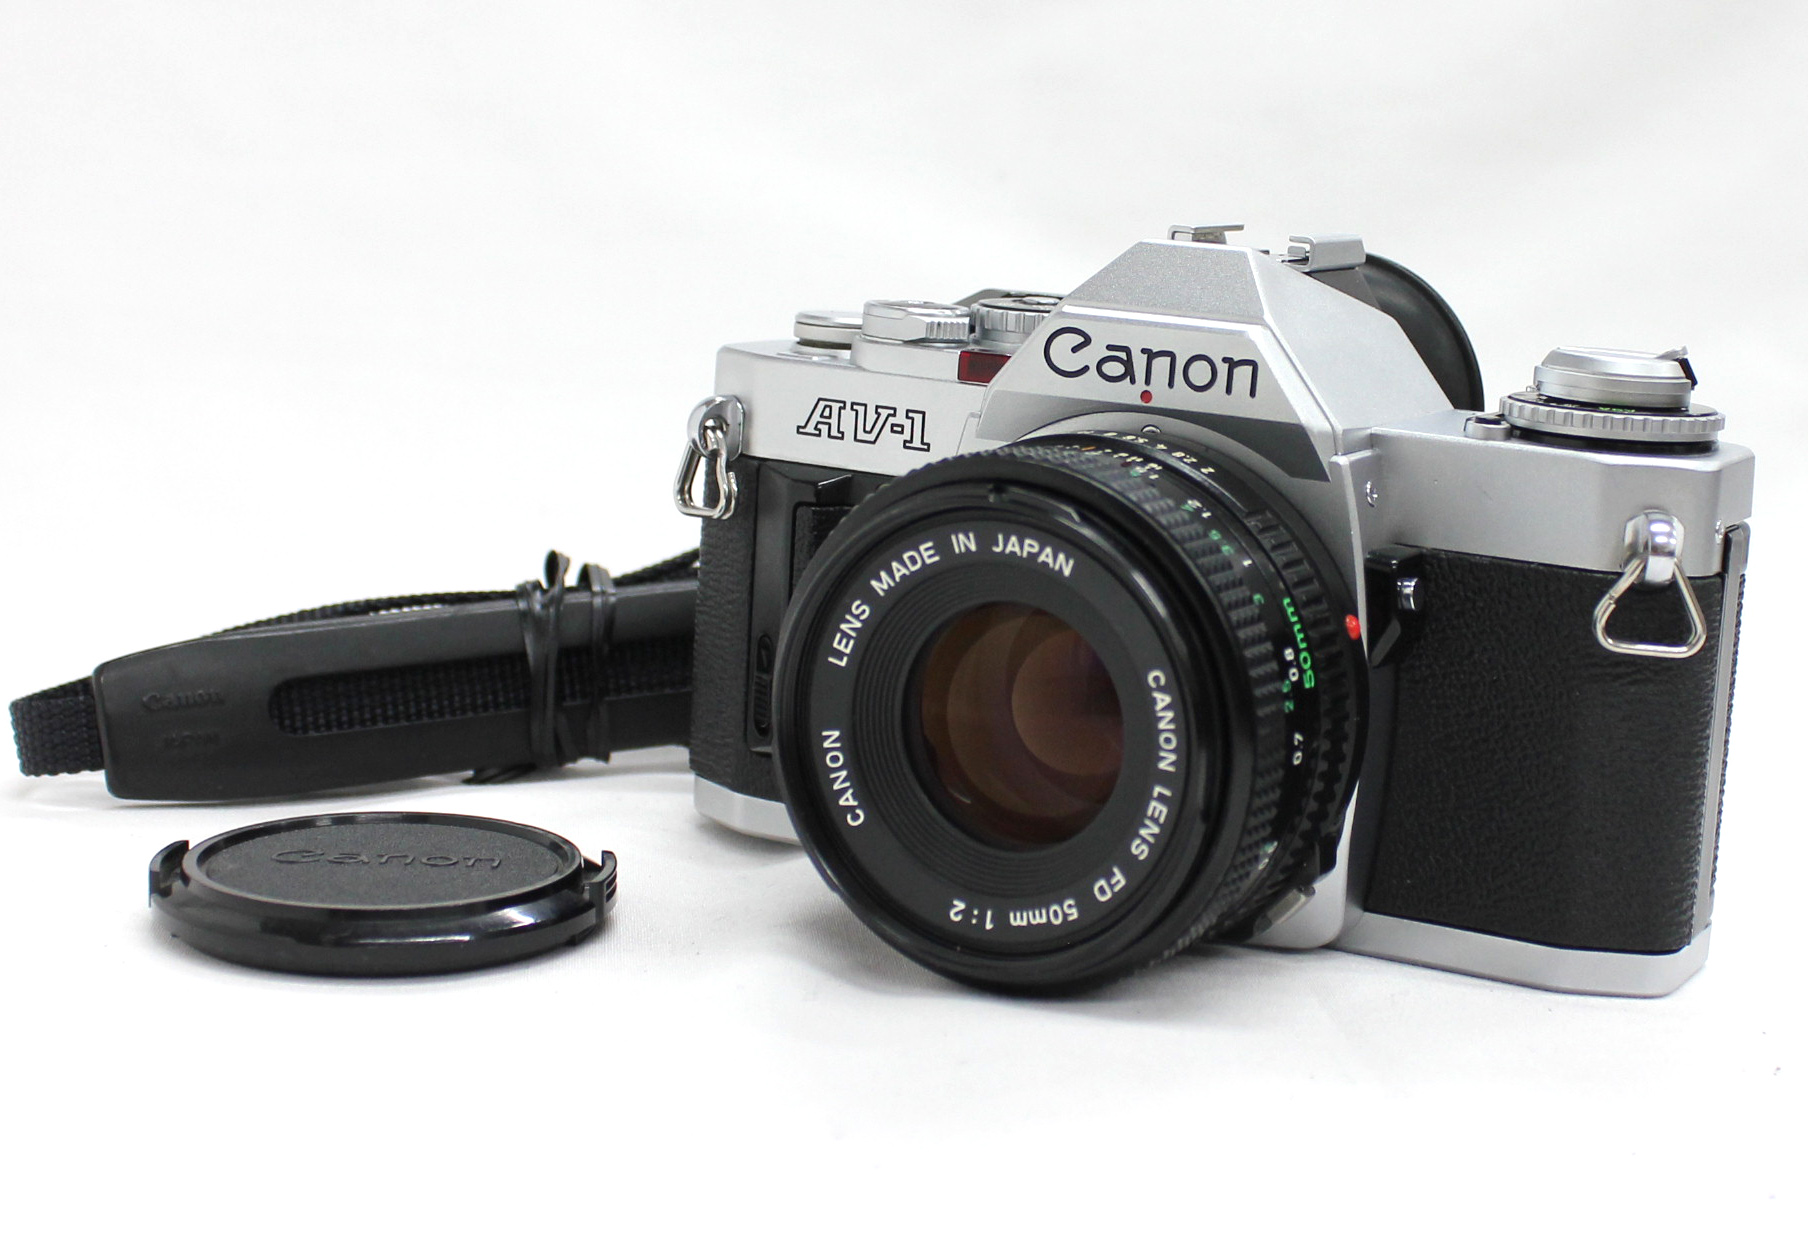 Japan Used Camera Shop | [Excellent+++++] Canon AV-1 SLR Film Camera with New FD NFD 50mm F/2 Lens from Japan